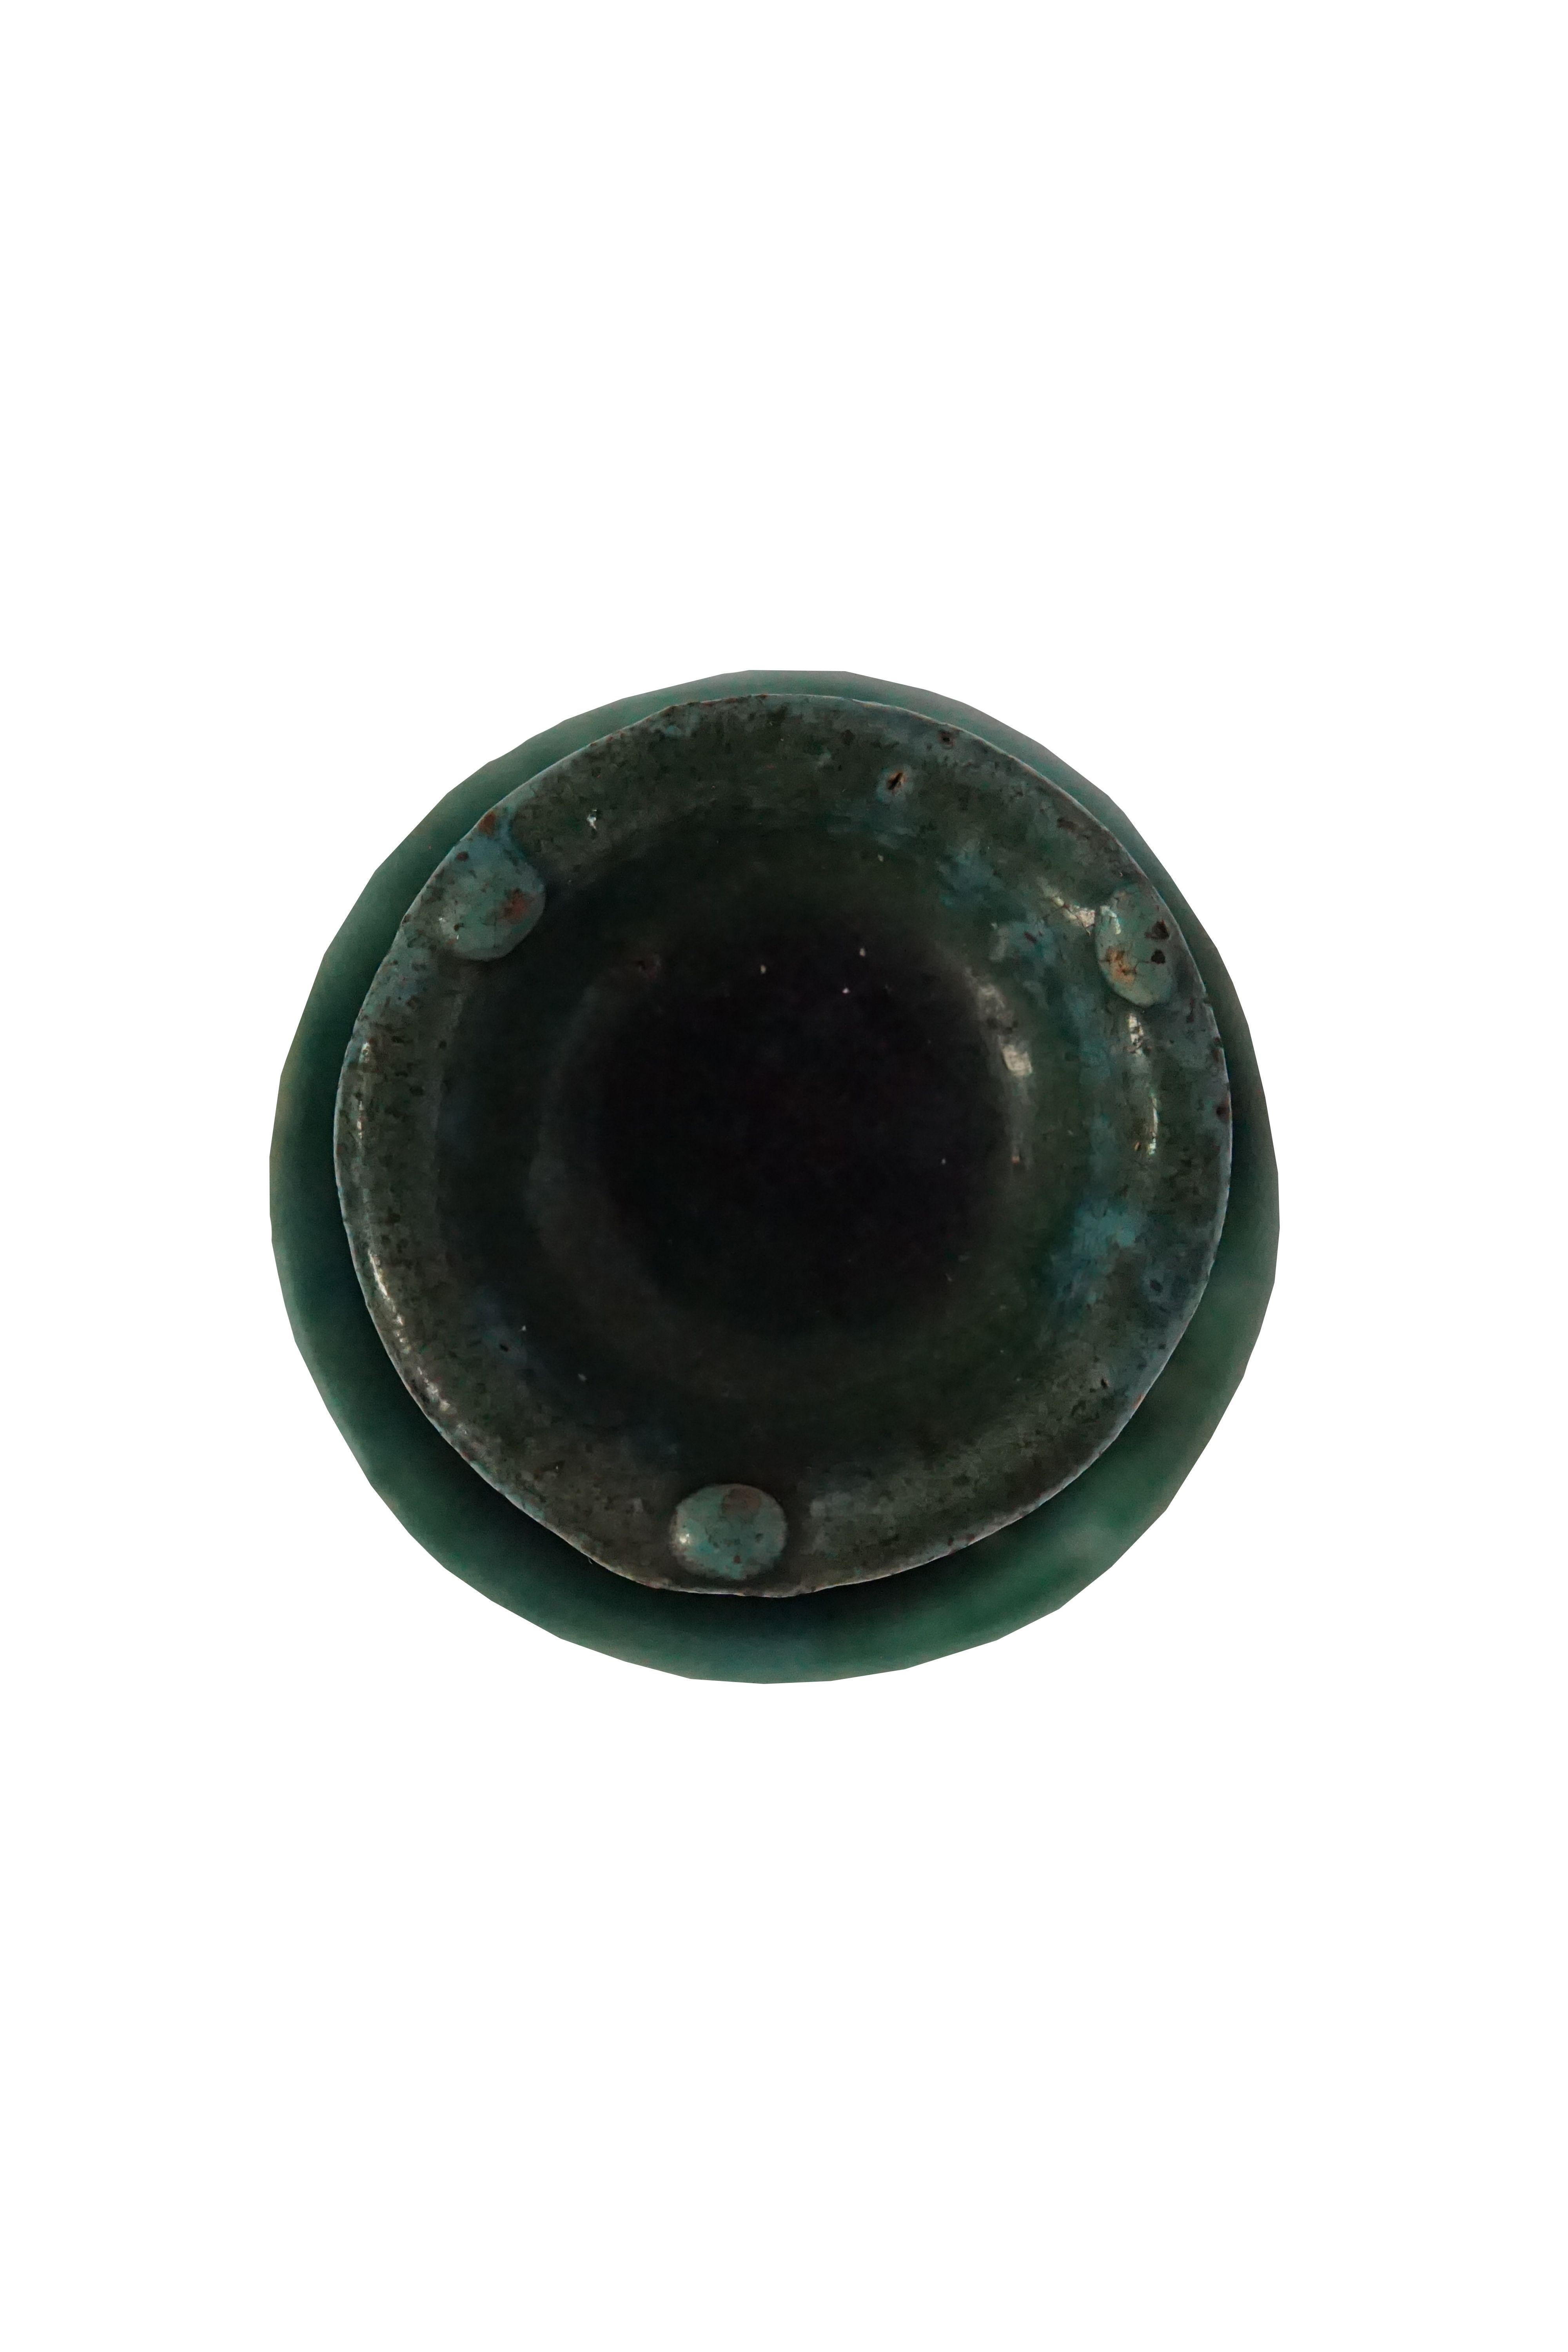 Glazed Chinese Ceramic 'Shiwan' Oil Lamp / Candle Holder, Green Glaze, c. 1950 For Sale